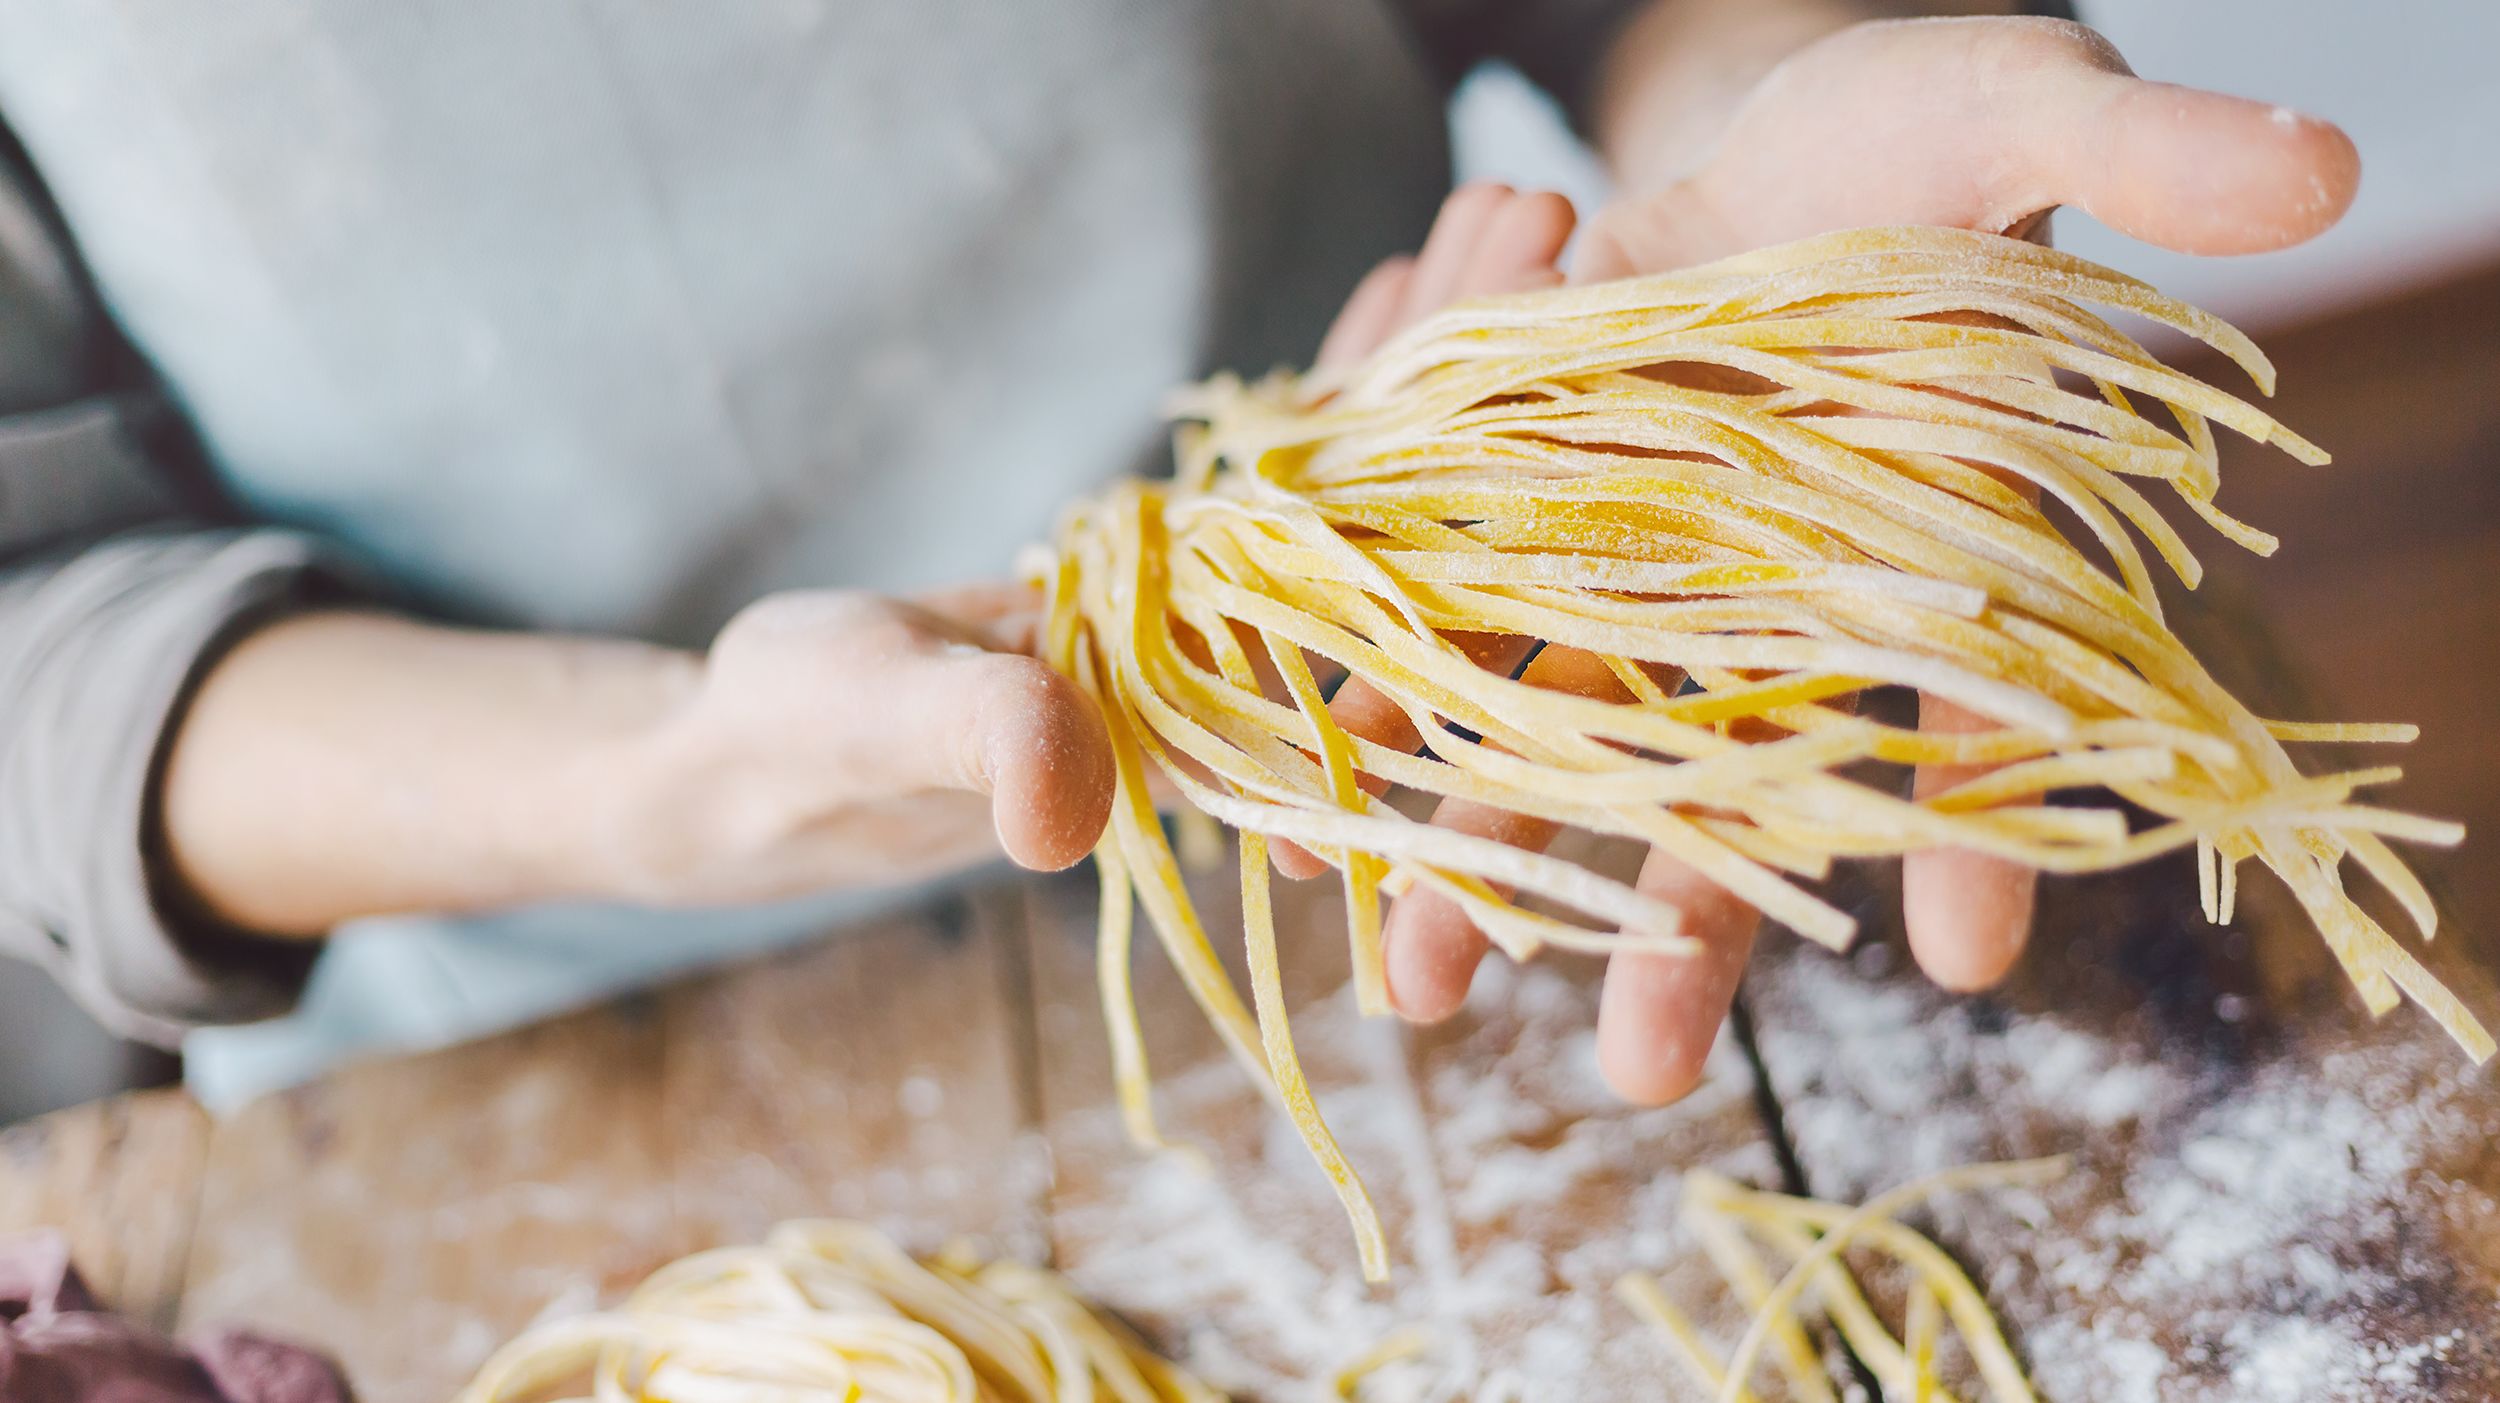 How to make homemade pasta, according to chefs